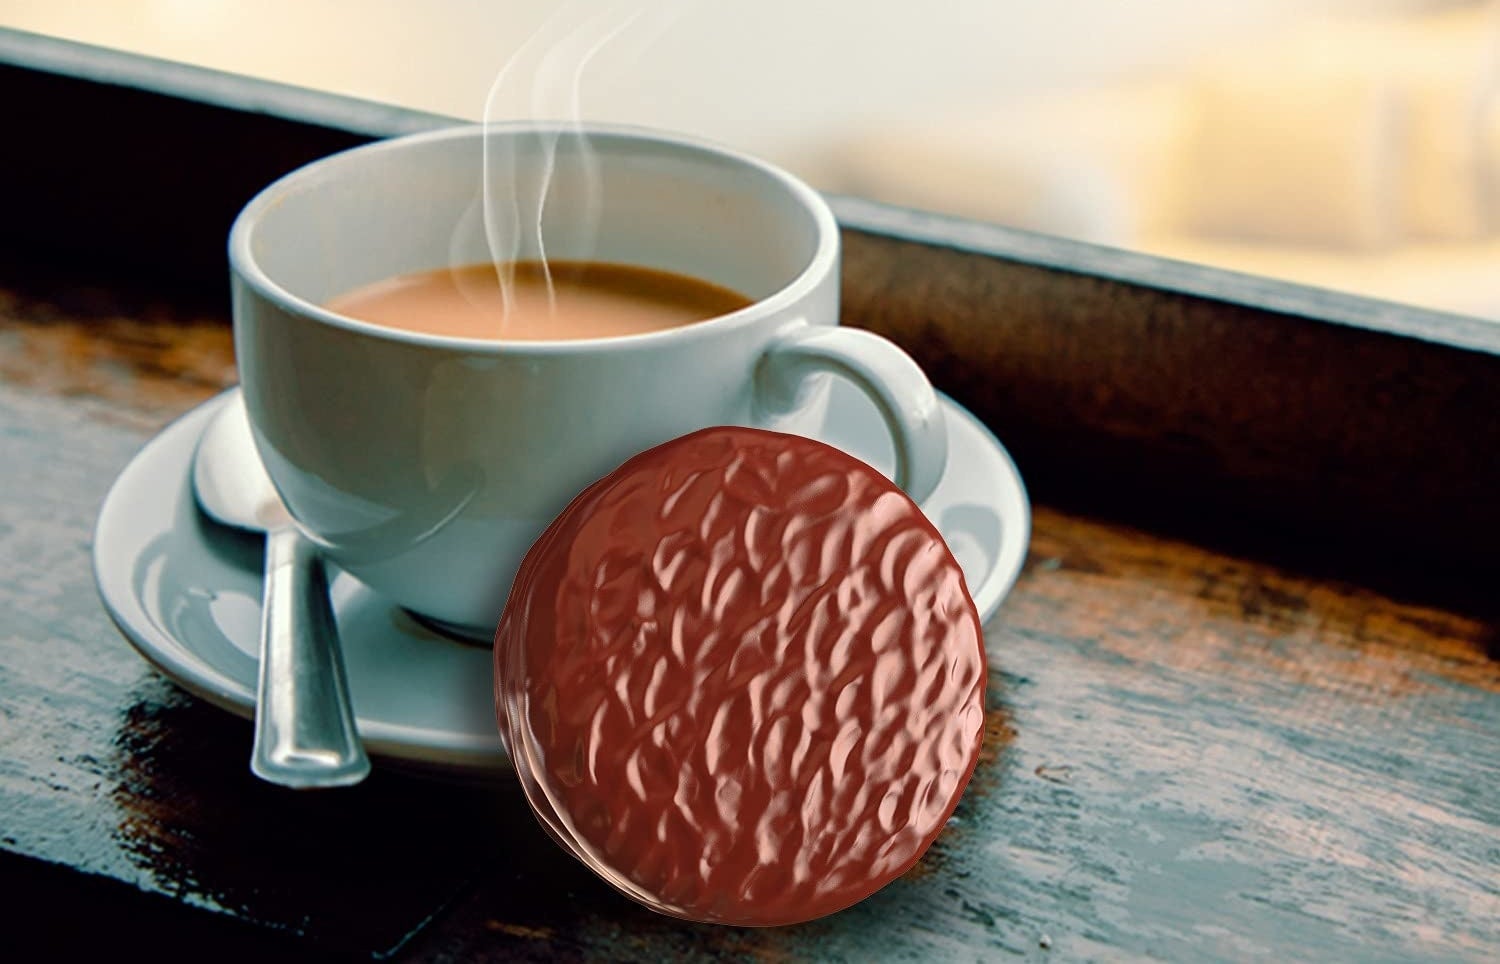 A piece of choco pie kept beside a steaming cup of chai